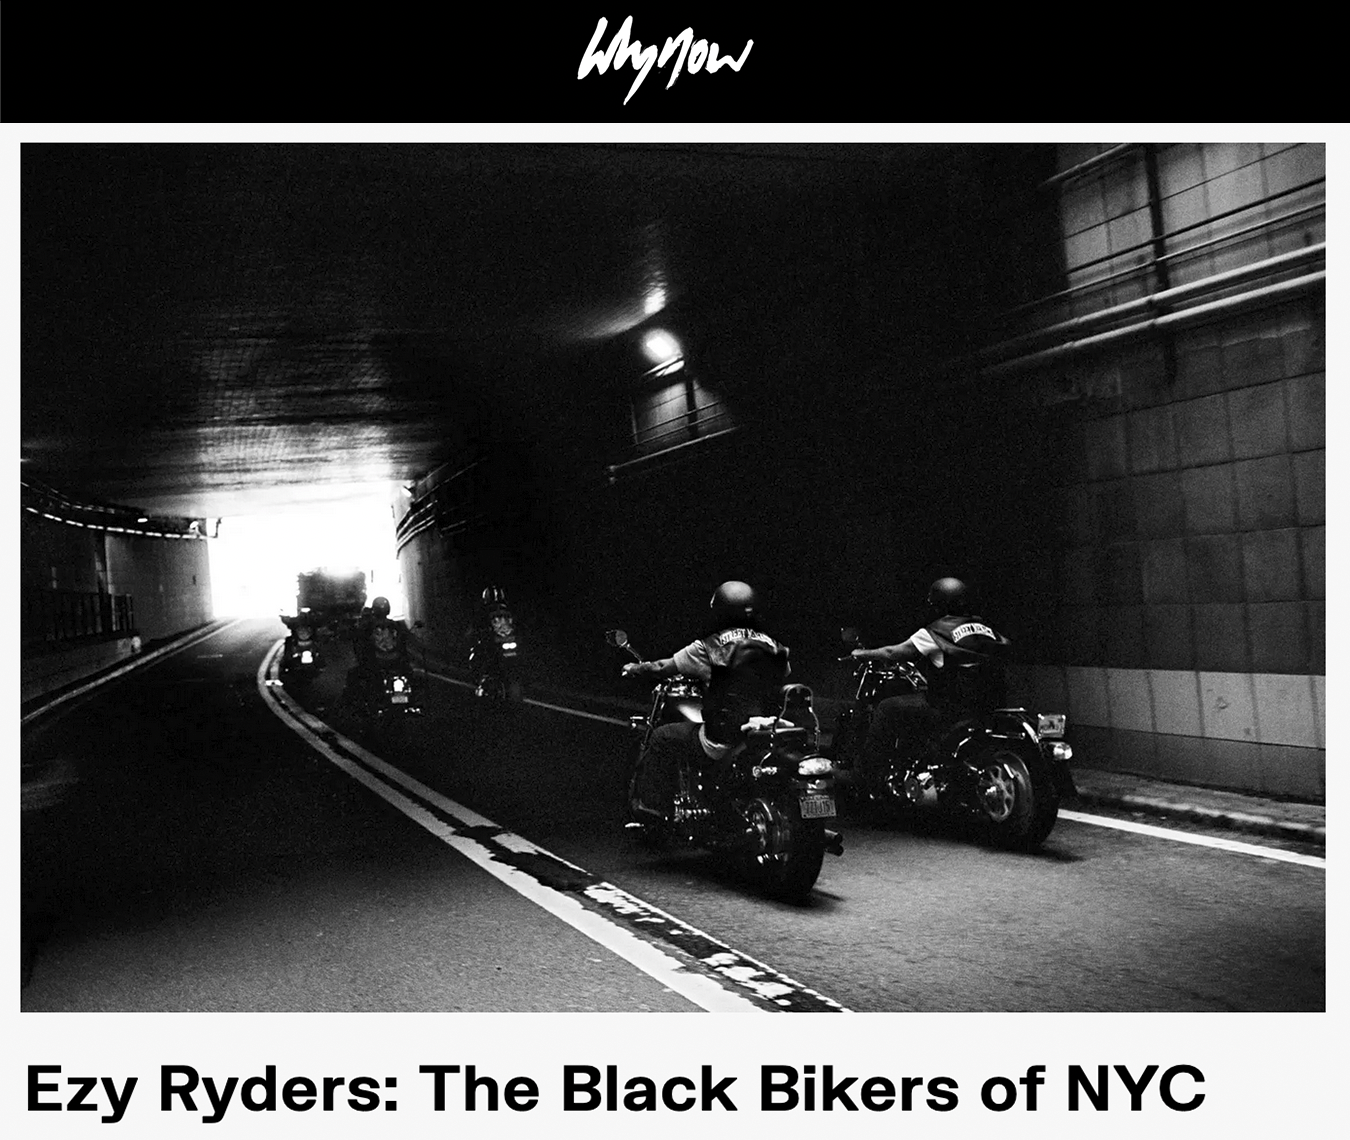 Thumbnail of Ezy Ryders in NBC News, i-D/Vice, WhyNow